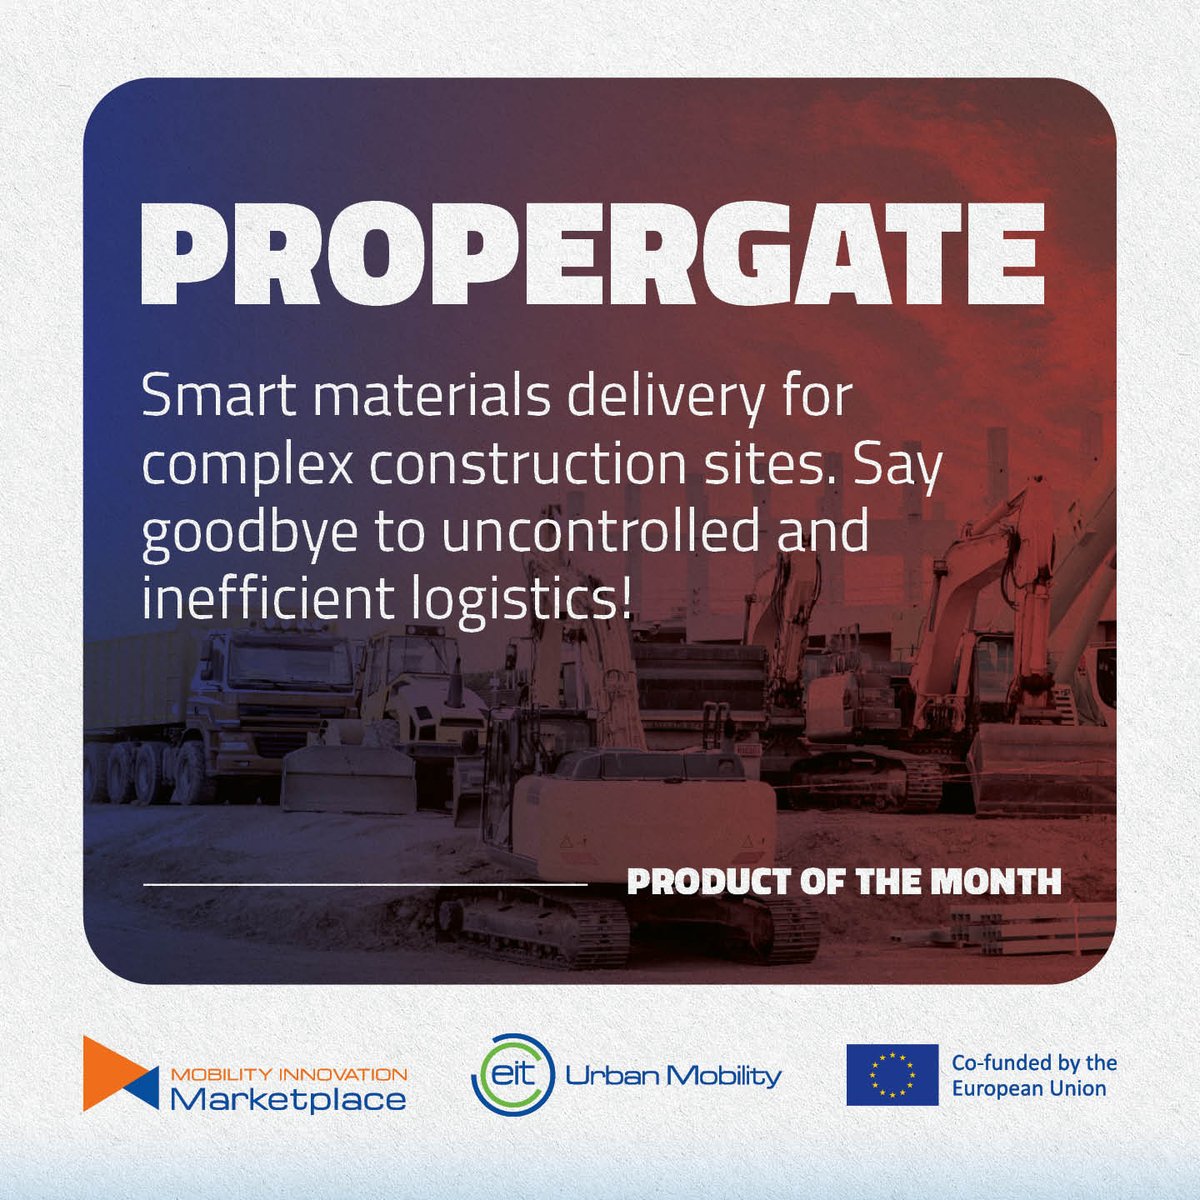 🌐🏗️ Say goodbye to uncontrolled and inefficient #logistics! @ProperGateApp connects construction sites with suppliers in a #digital ecosystem, fully utilising delivery vehicle capacity while ensuring end-to-end material flow! 🔗 Learn more: marketplace.eiturbanmobility.eu/products/prope…